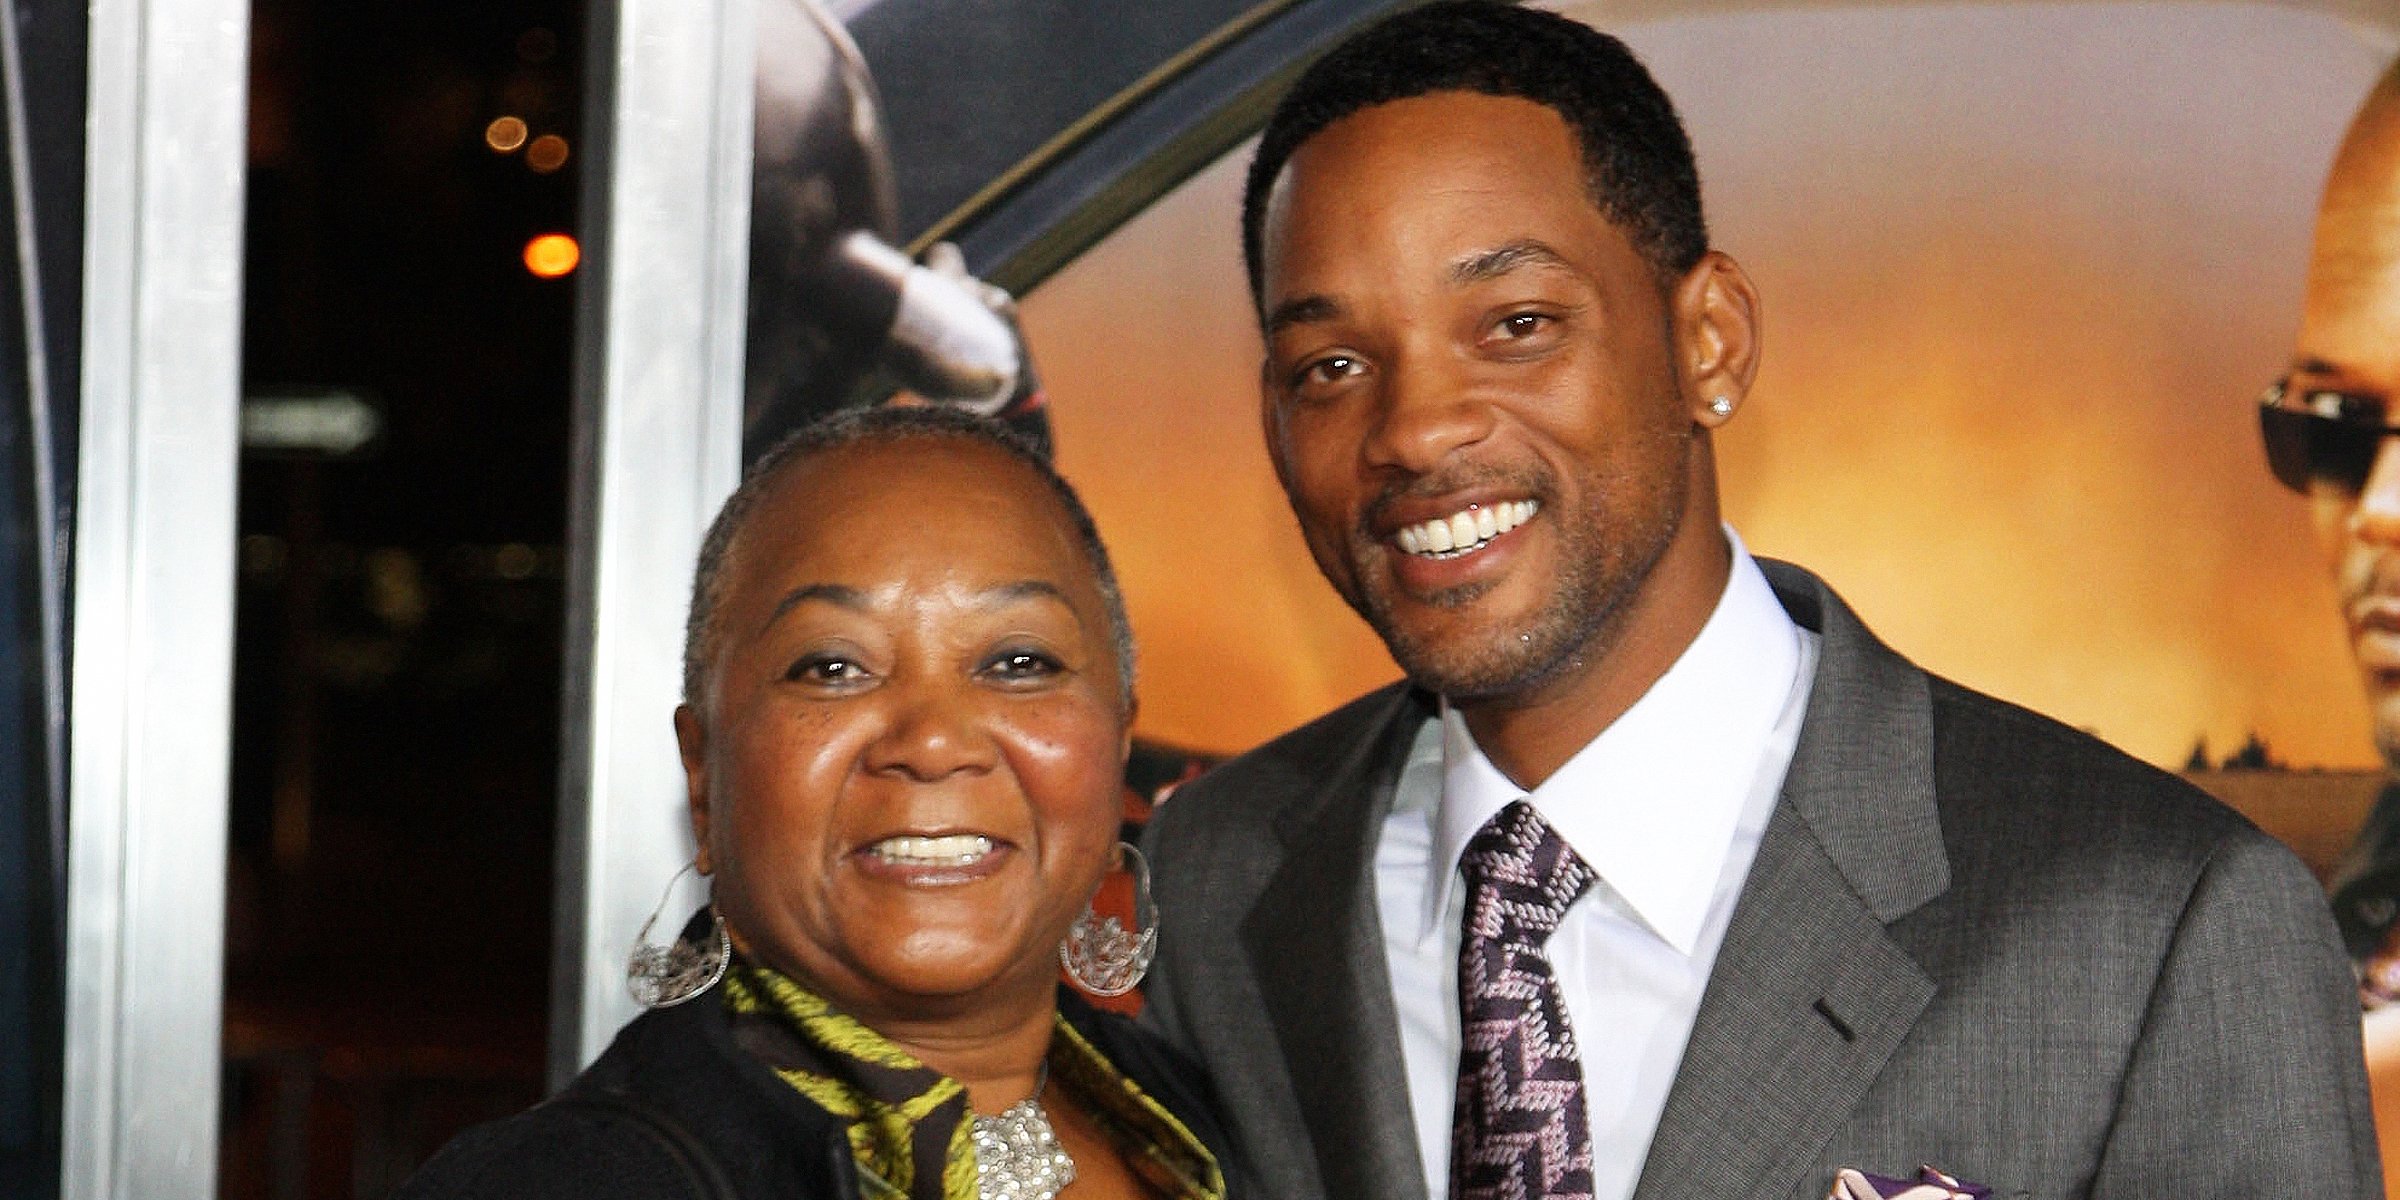 Will Smith and his mother Caroline Bright | Source: Getty Images